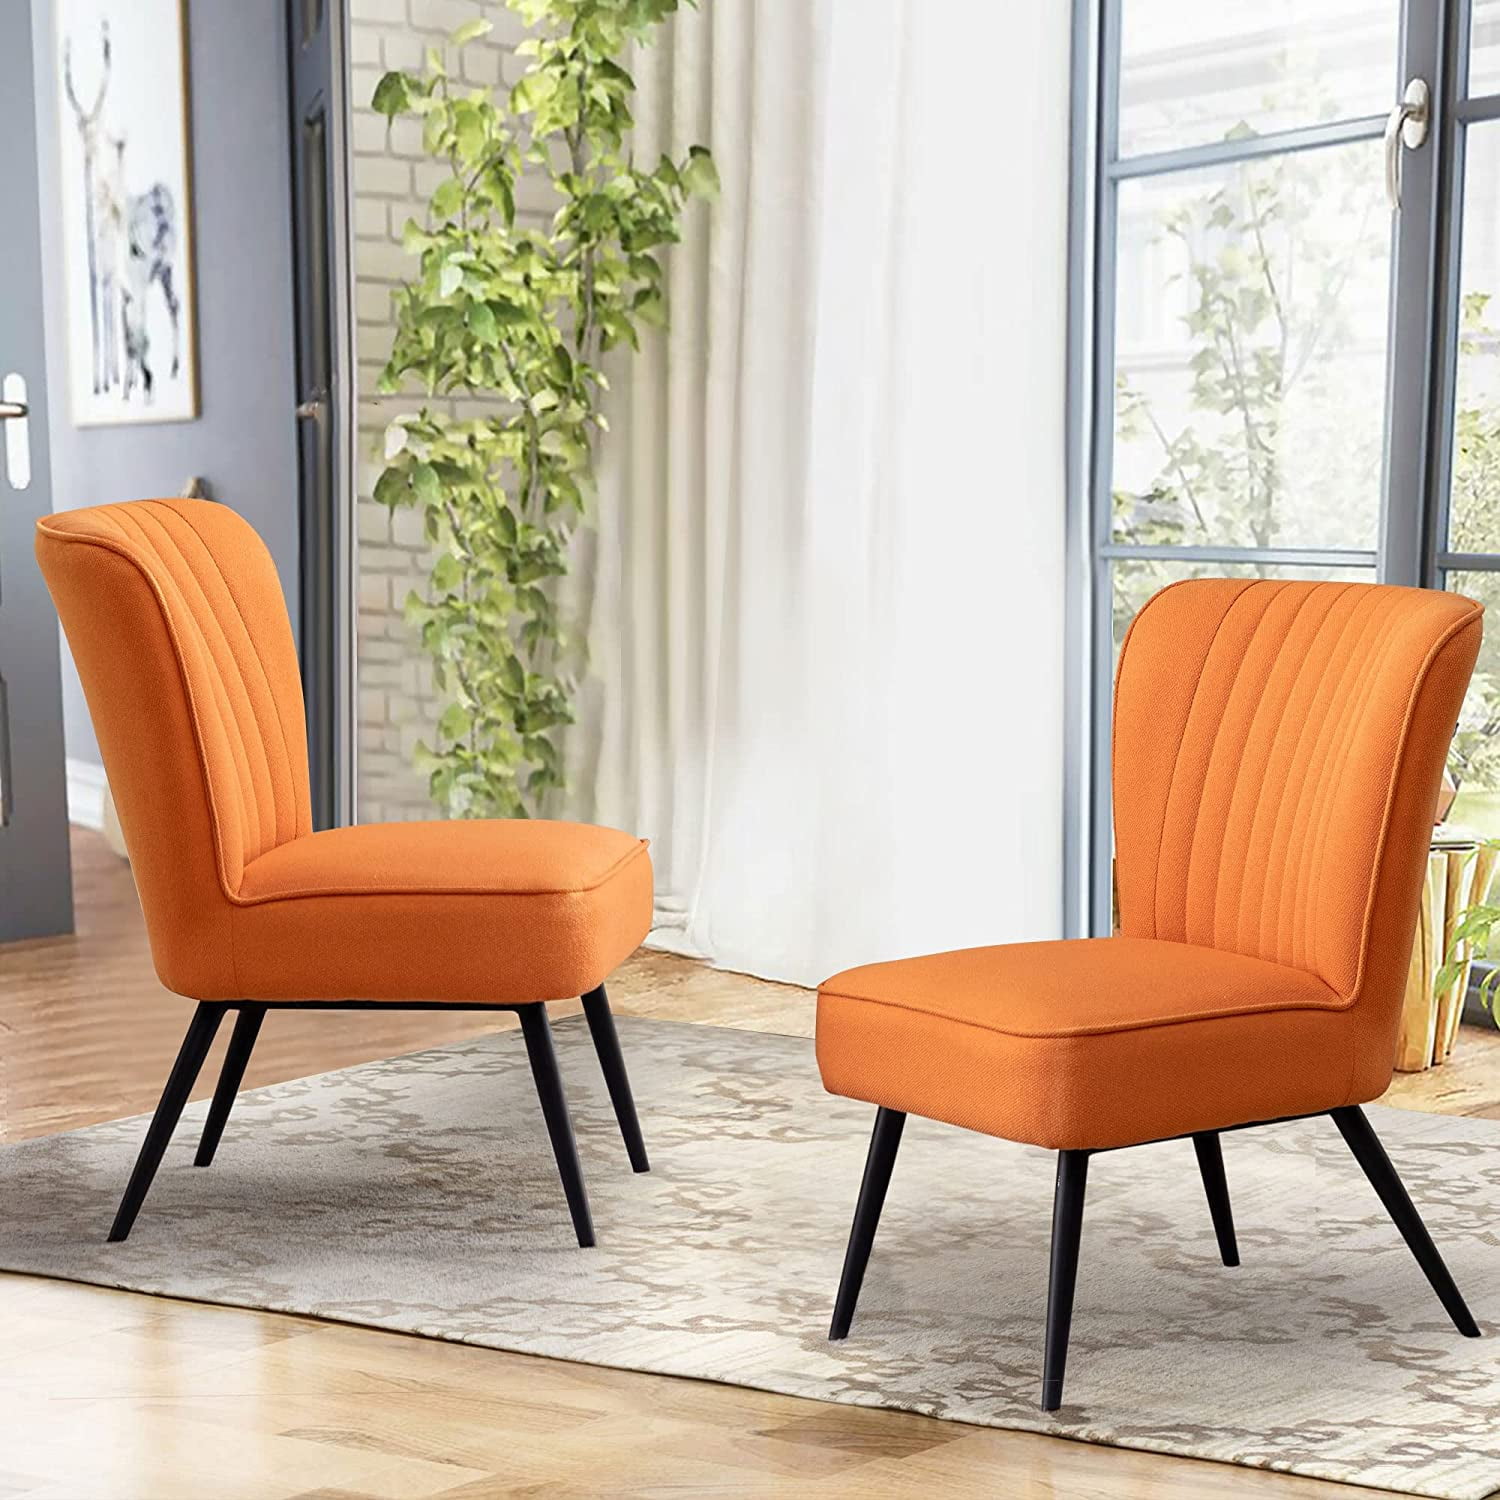 Andeworld Modern Armless Accent Chair Chairs Club for Wingback Slipper Bedroom-Orange Living Upholstered Sofa Couch 2 Room Guest of Comfy Reception Set Single